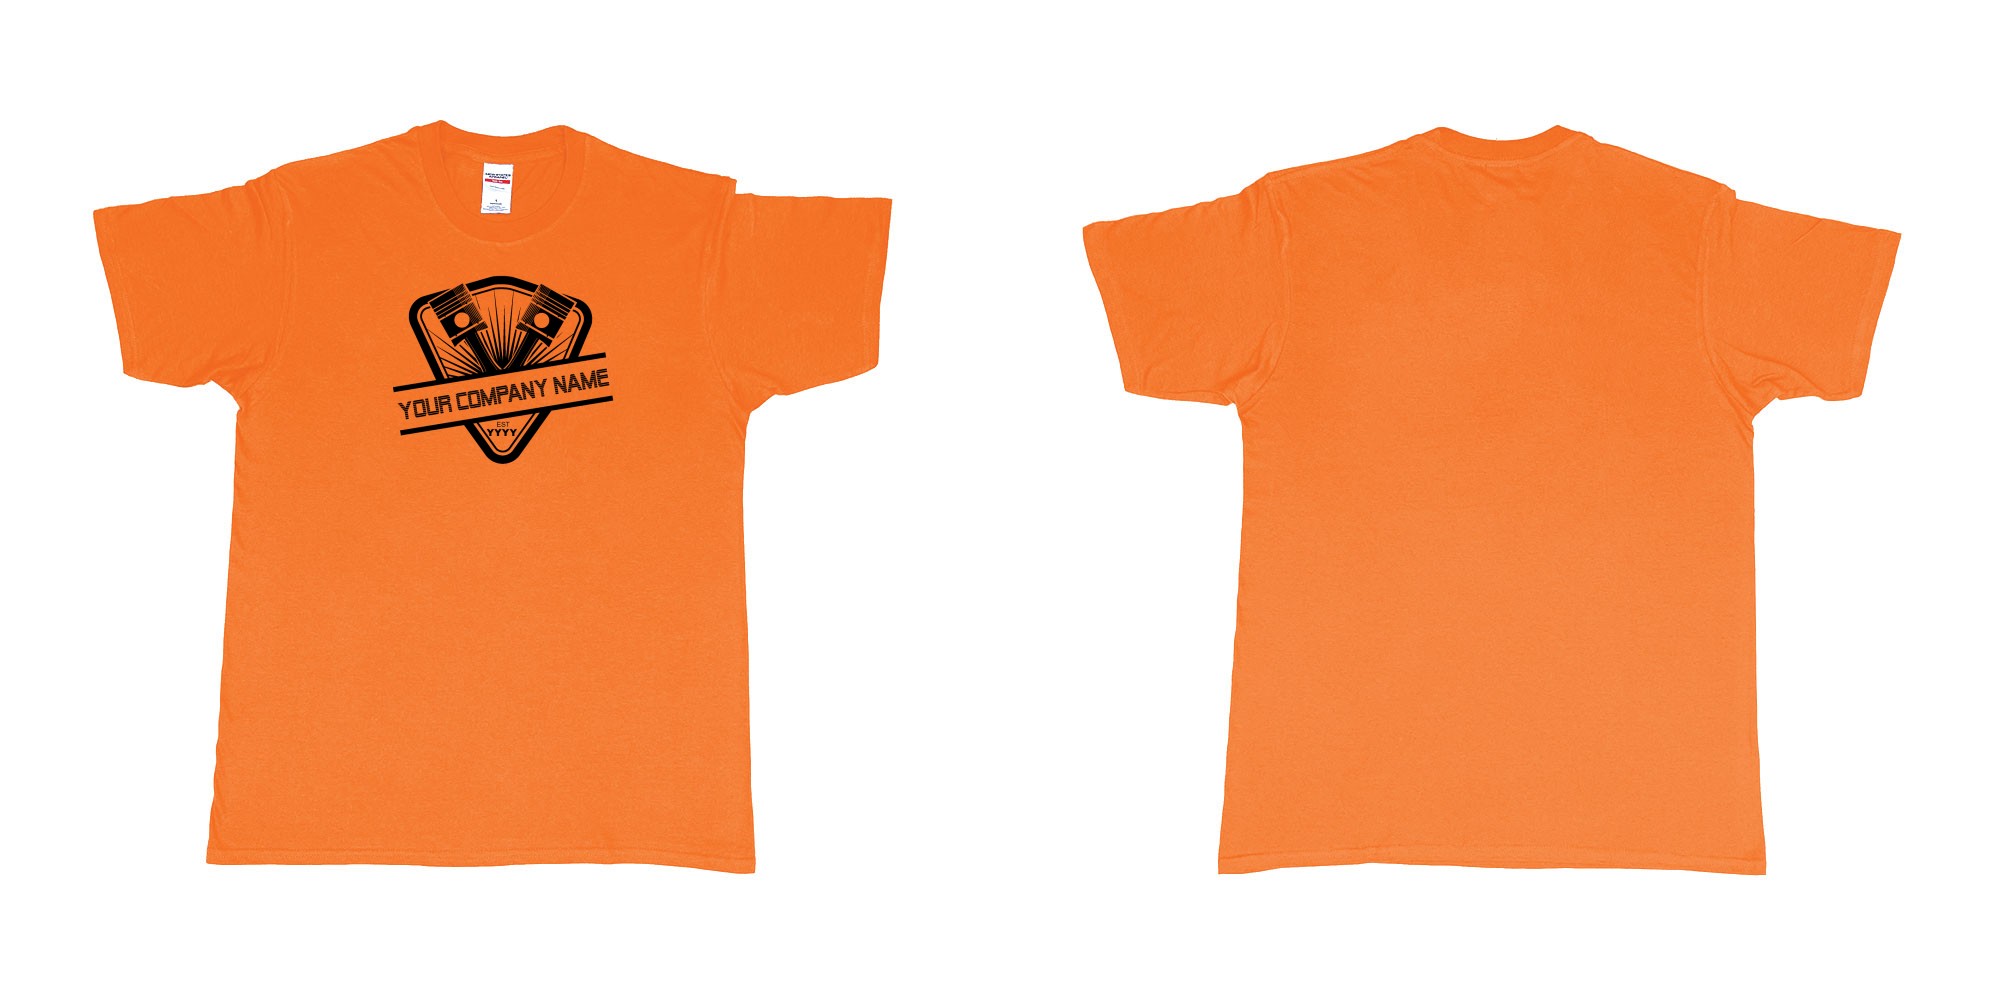 Custom tshirt design two piston custom personalized car repairs or mechanic own text print tshirt design in fabric color orange choice your own text made in Bali by The Pirate Way